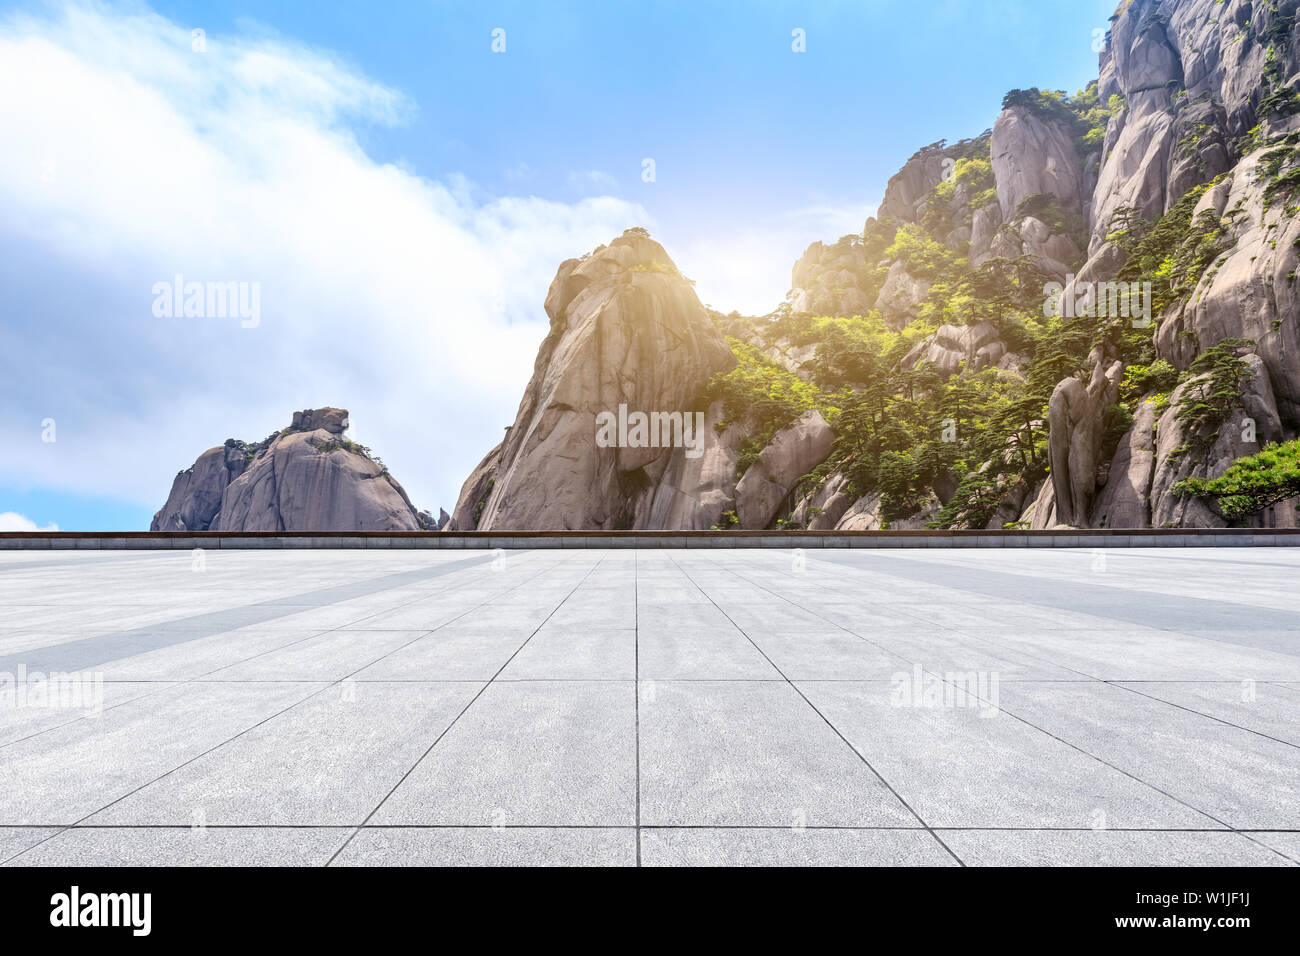 Empty square floor and beautiful mountain nature landscape in Huangshan,Anhui,China. Stock Photo